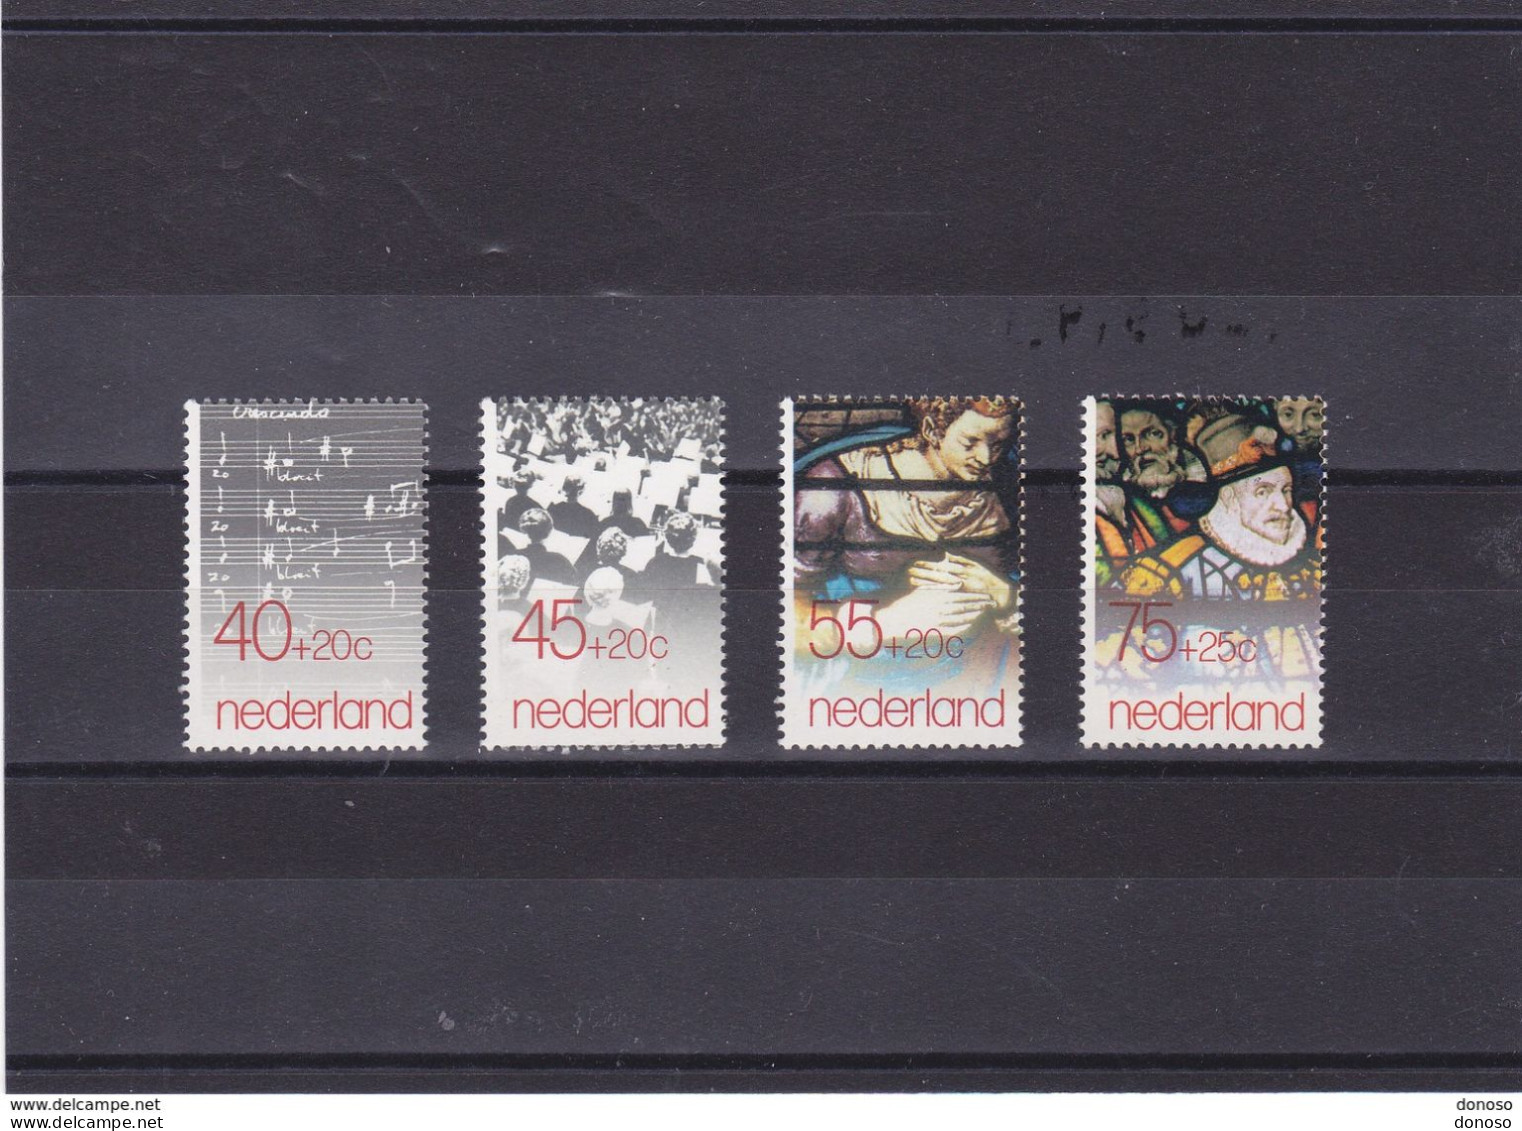 PAYS BAS 1979 Musique Vitraux  Yvert 1107-1110, Michel 1136-1139 NEUF** MNH Cote 3,50 Euros - Unused Stamps